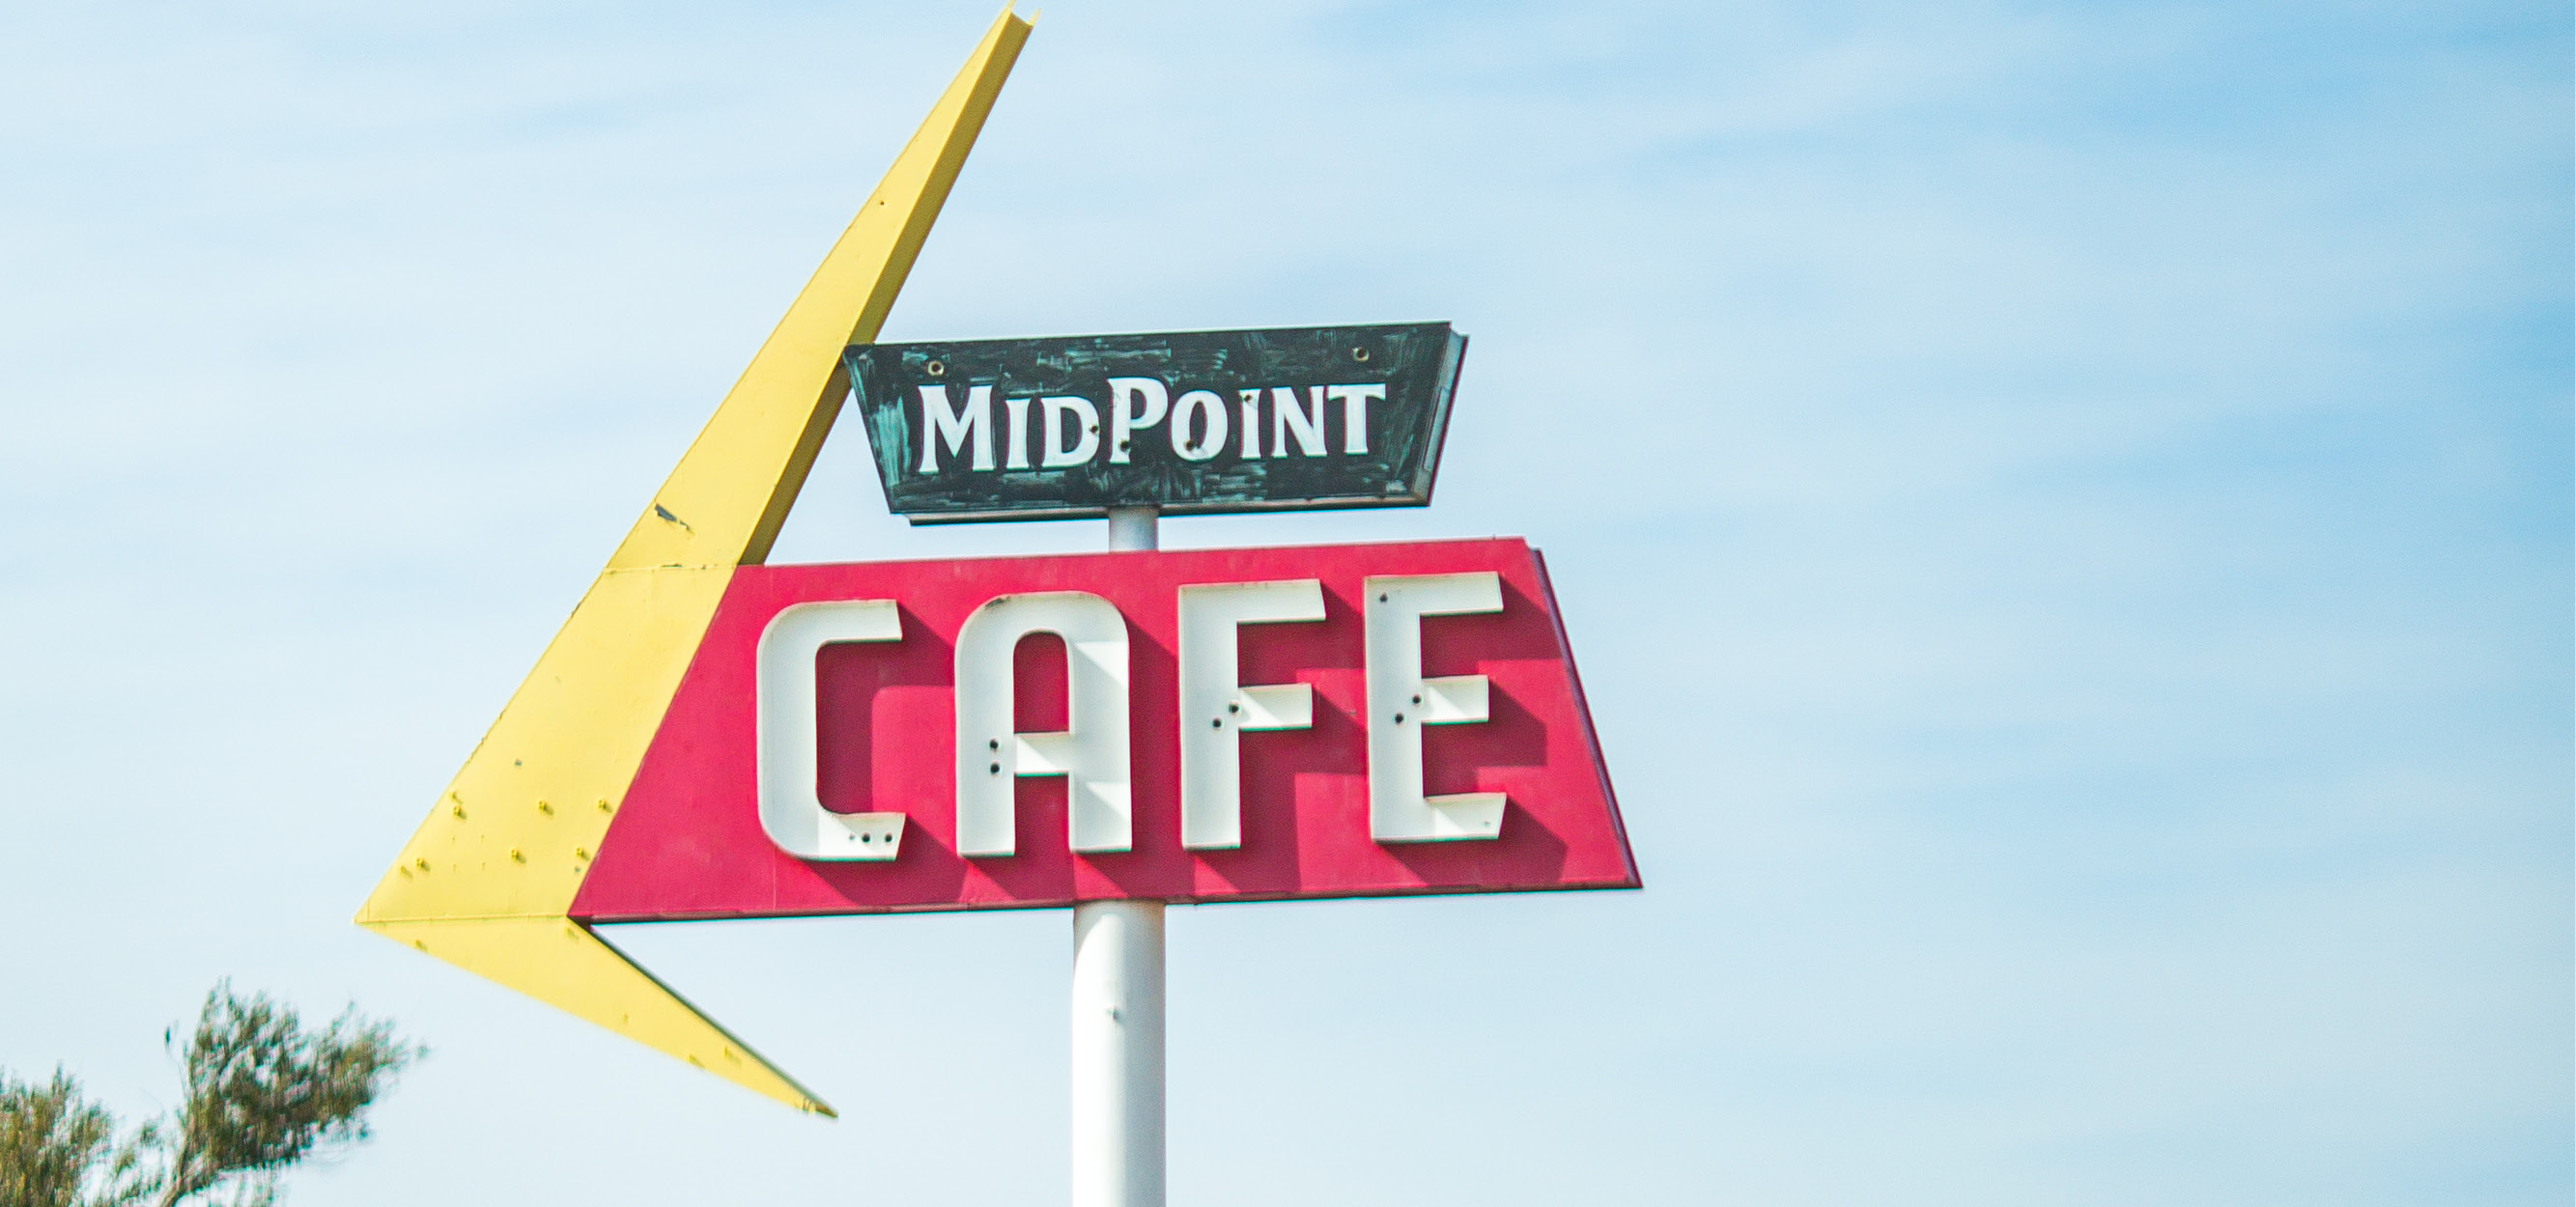 texas-route-66-midpoint-cafe